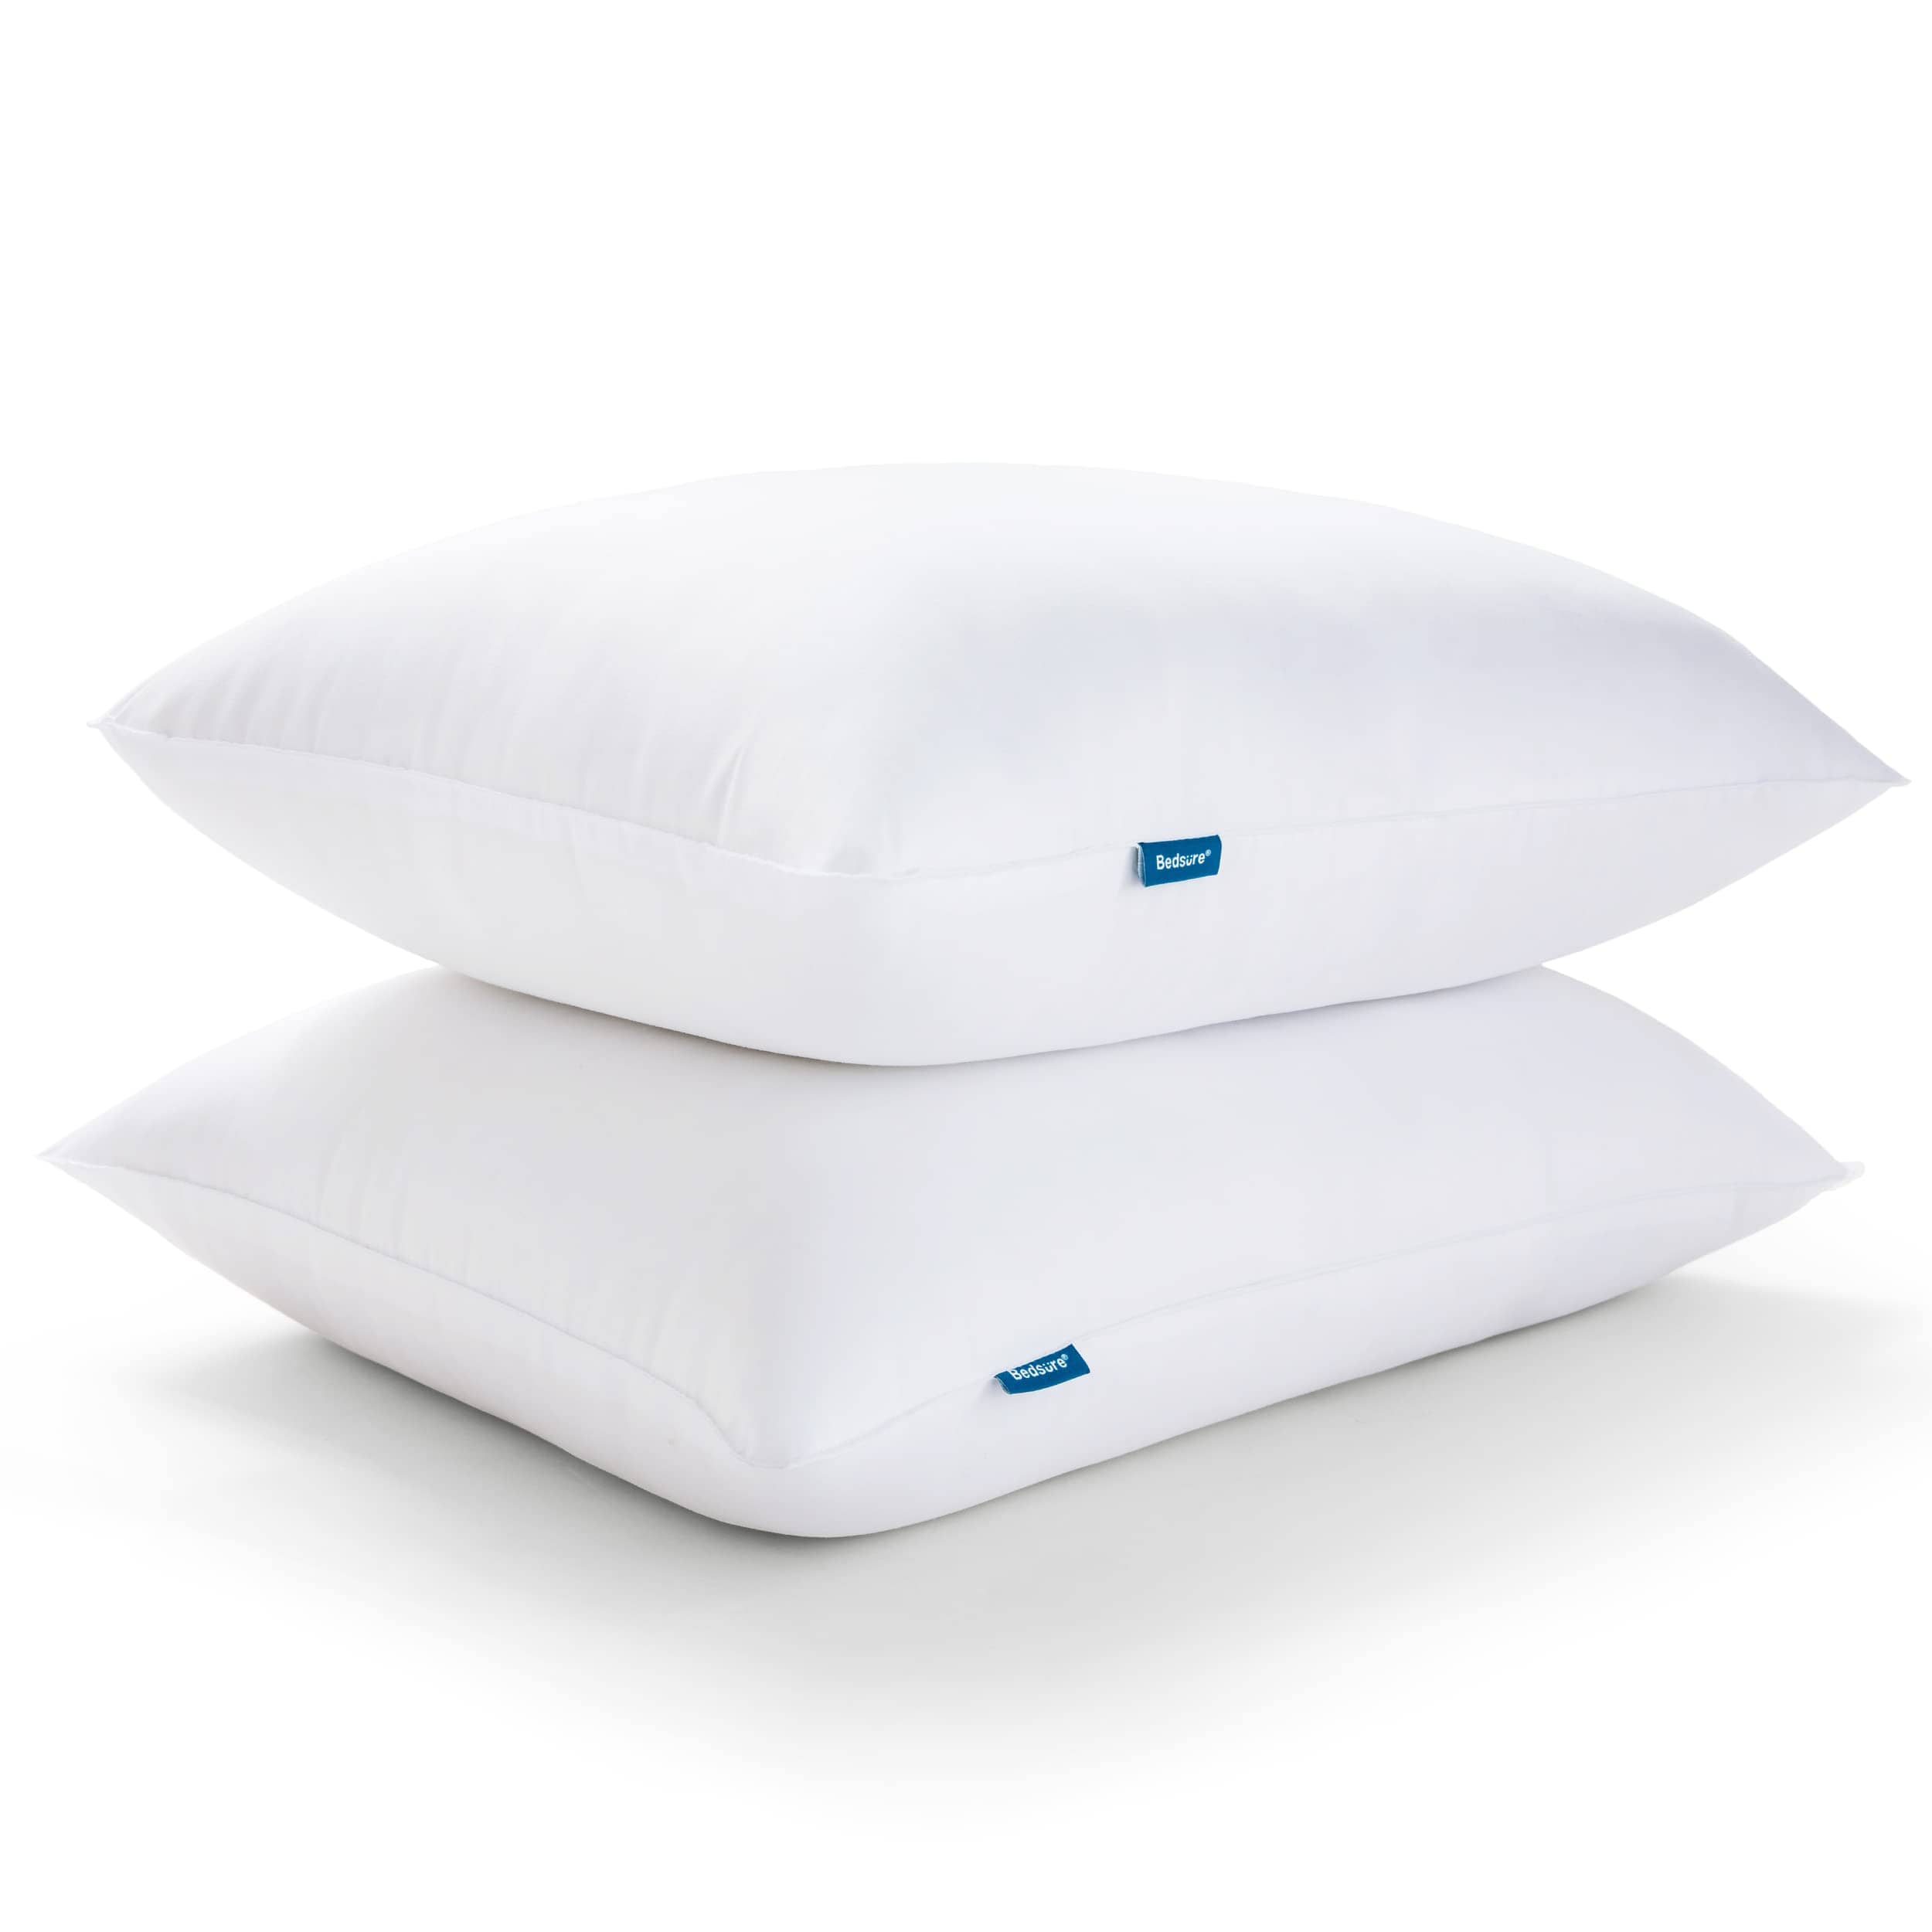 Bedsure Firm Pillows Queen Size Set of 2, Supportive, Down Alternative  Pillow for Side and Back Sleeper 